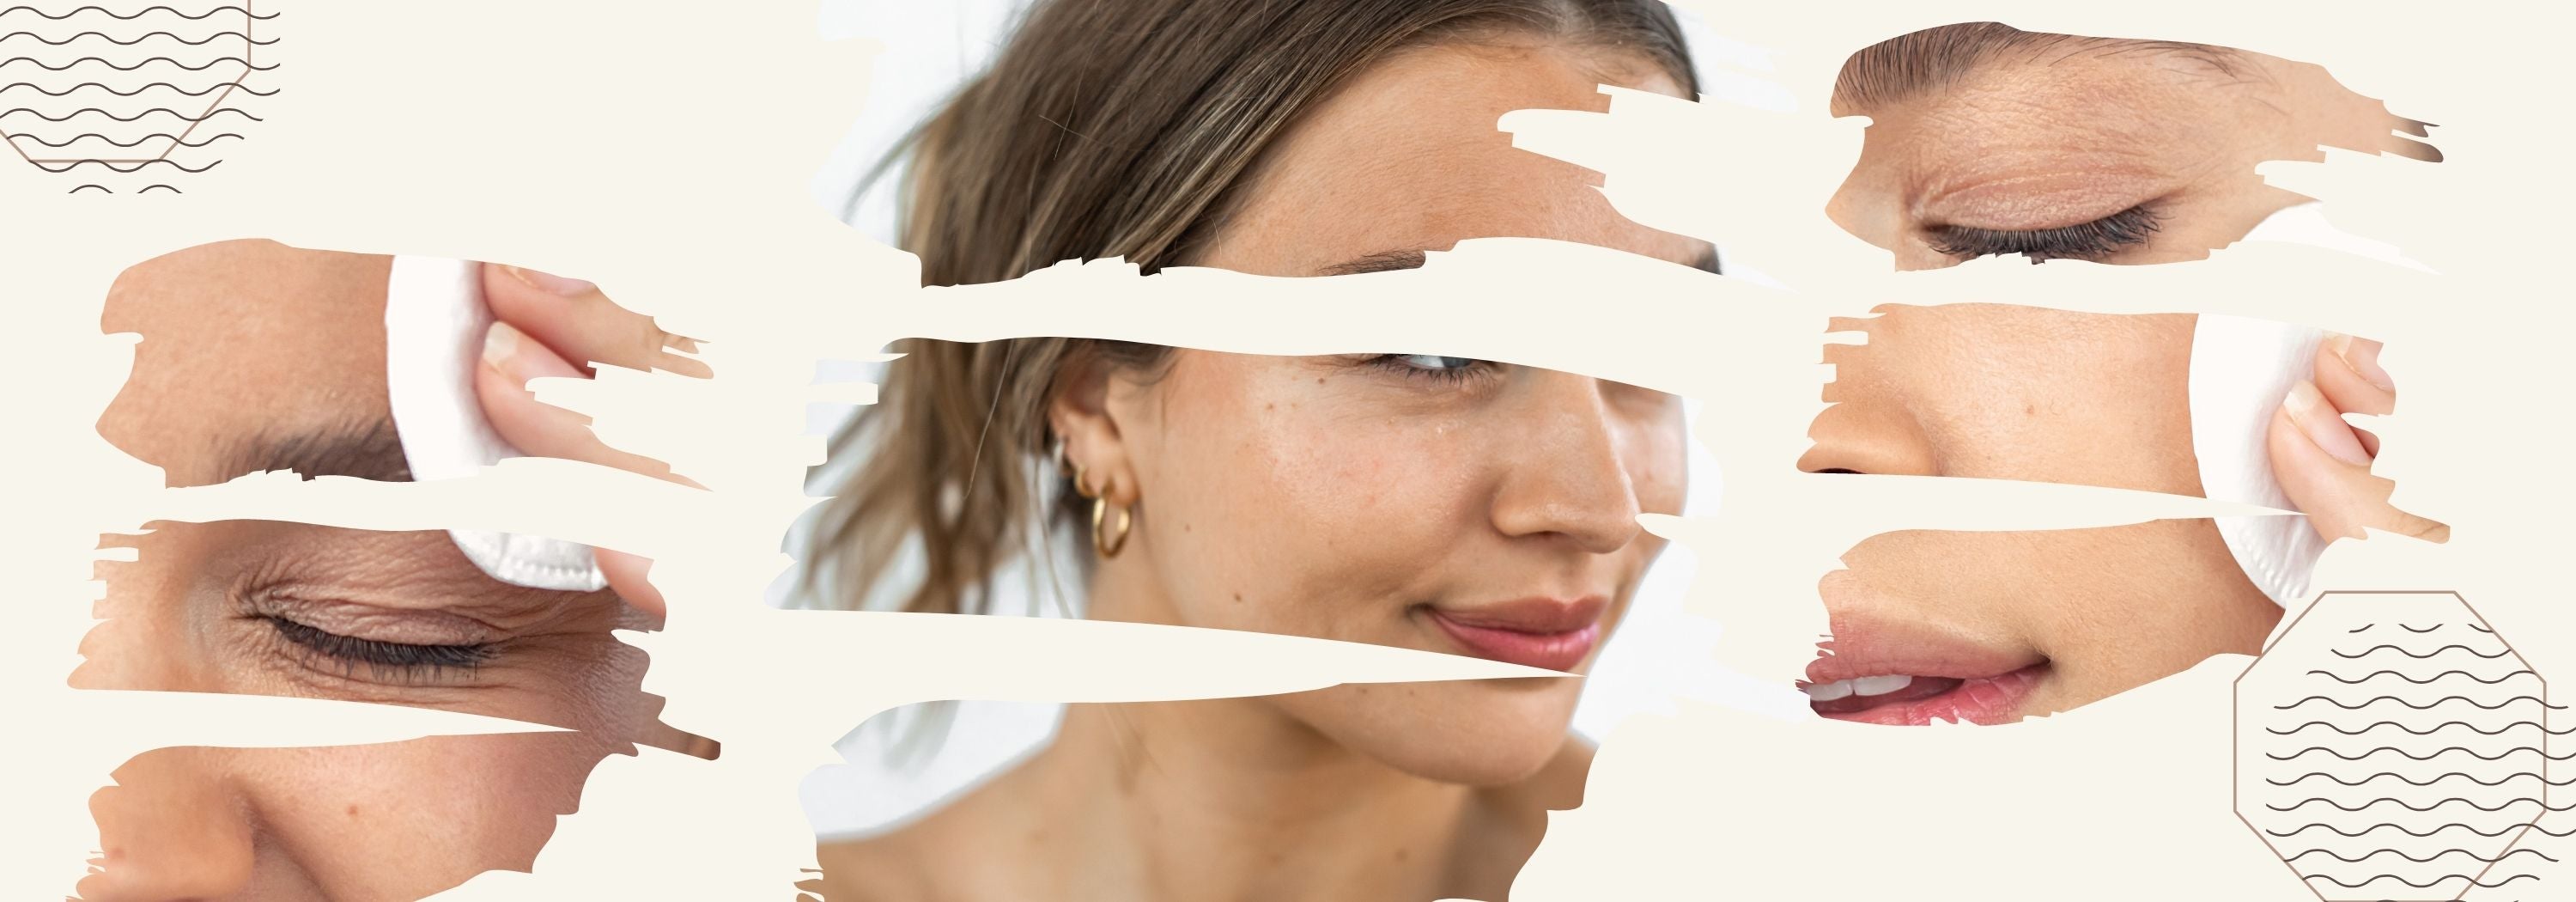 5 Unexpected Causes of Adult Acne - And How to Treat It